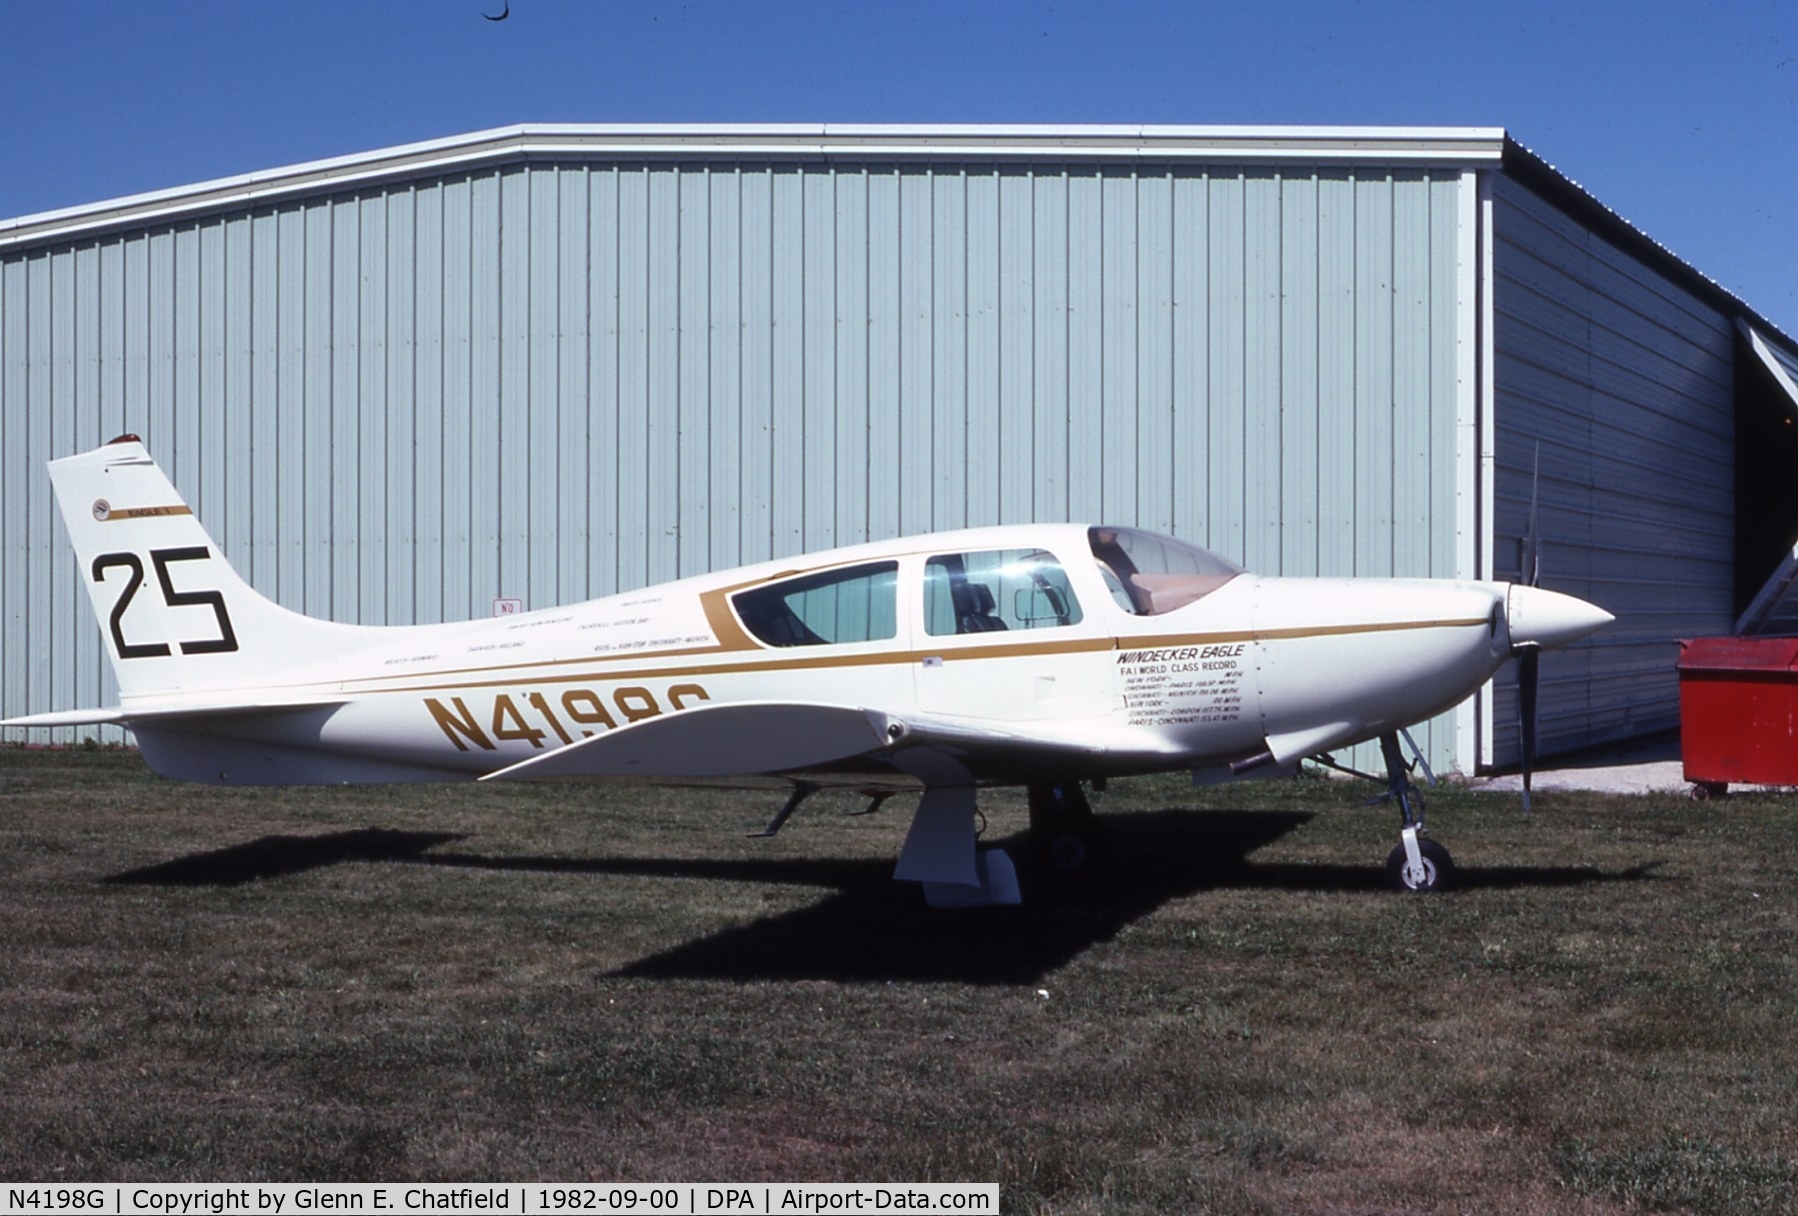 N4198G, 1970 Windecker AC-7 C/N 007, Visiting DuPage Airport when photographed